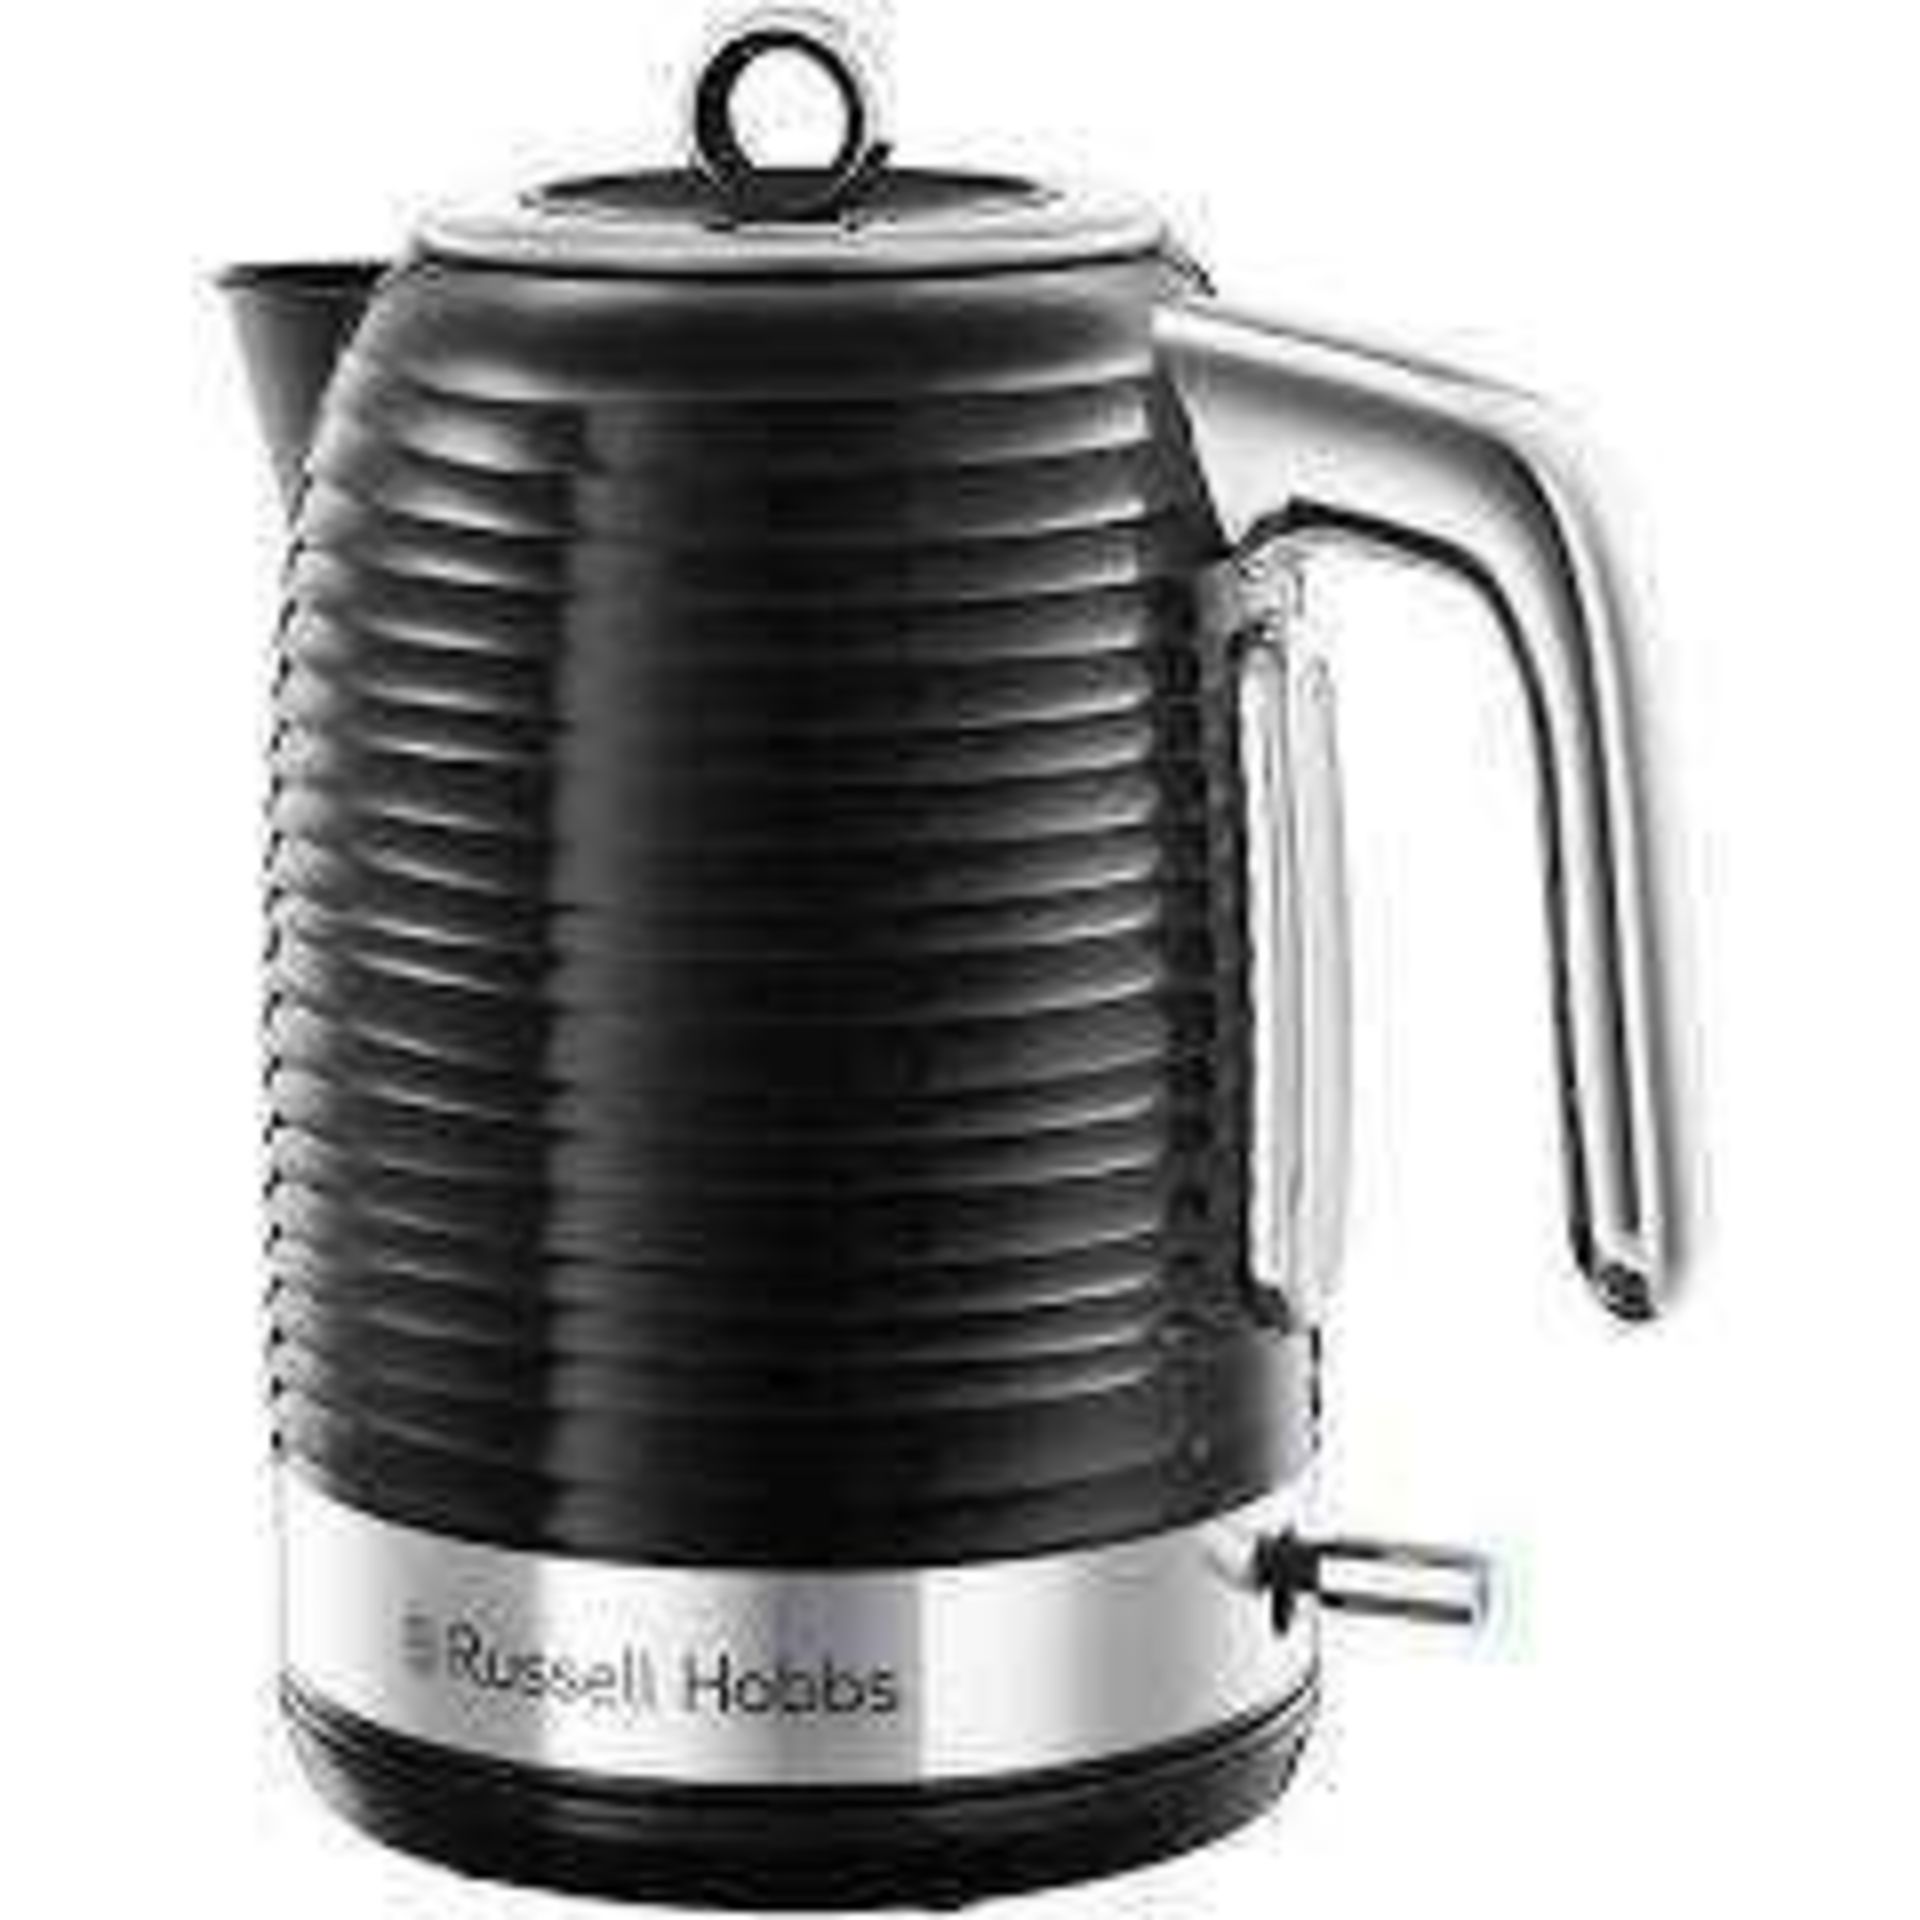 RRP £190 Lot To Contain 3 Boxed Russell Hobbs Kitchen Appliances To Include 1000W Mixer Inspire Blac - Image 3 of 3